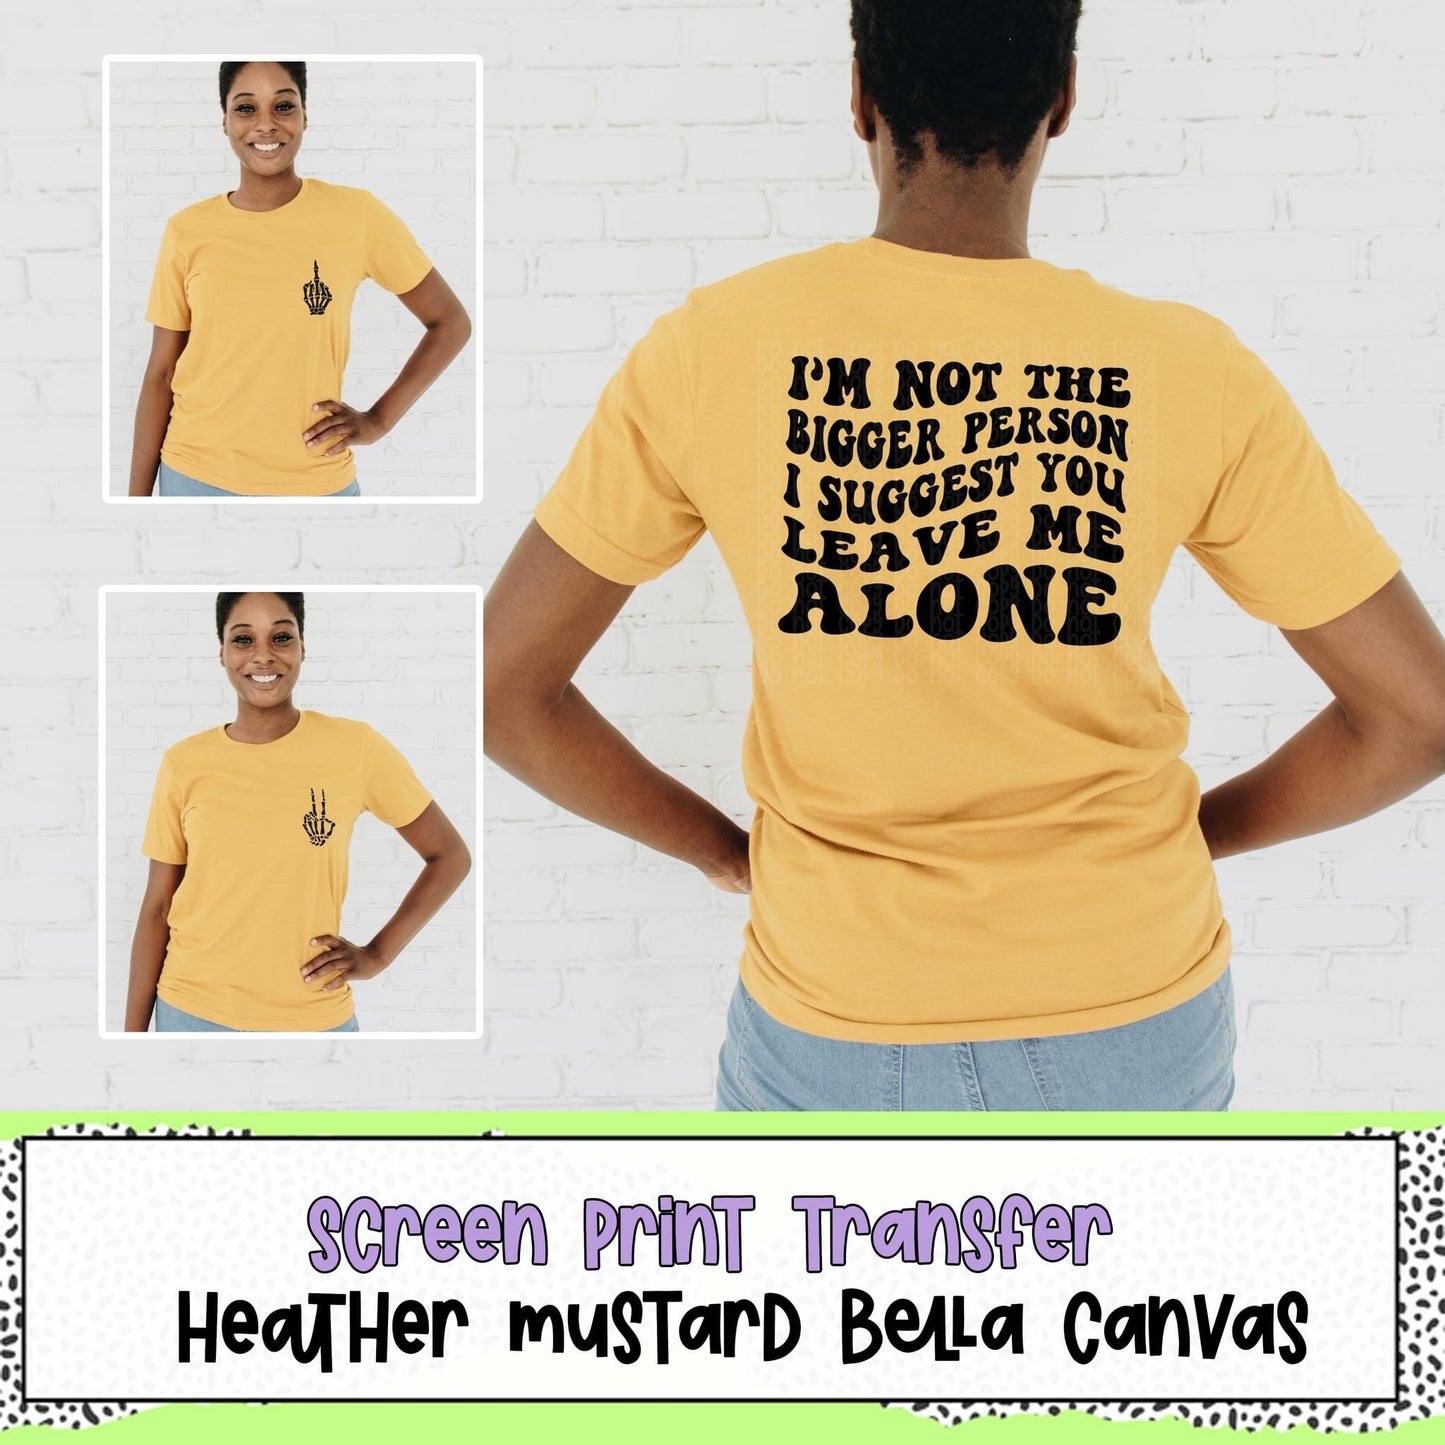 Not the bigger person, leave me alone T-shirt